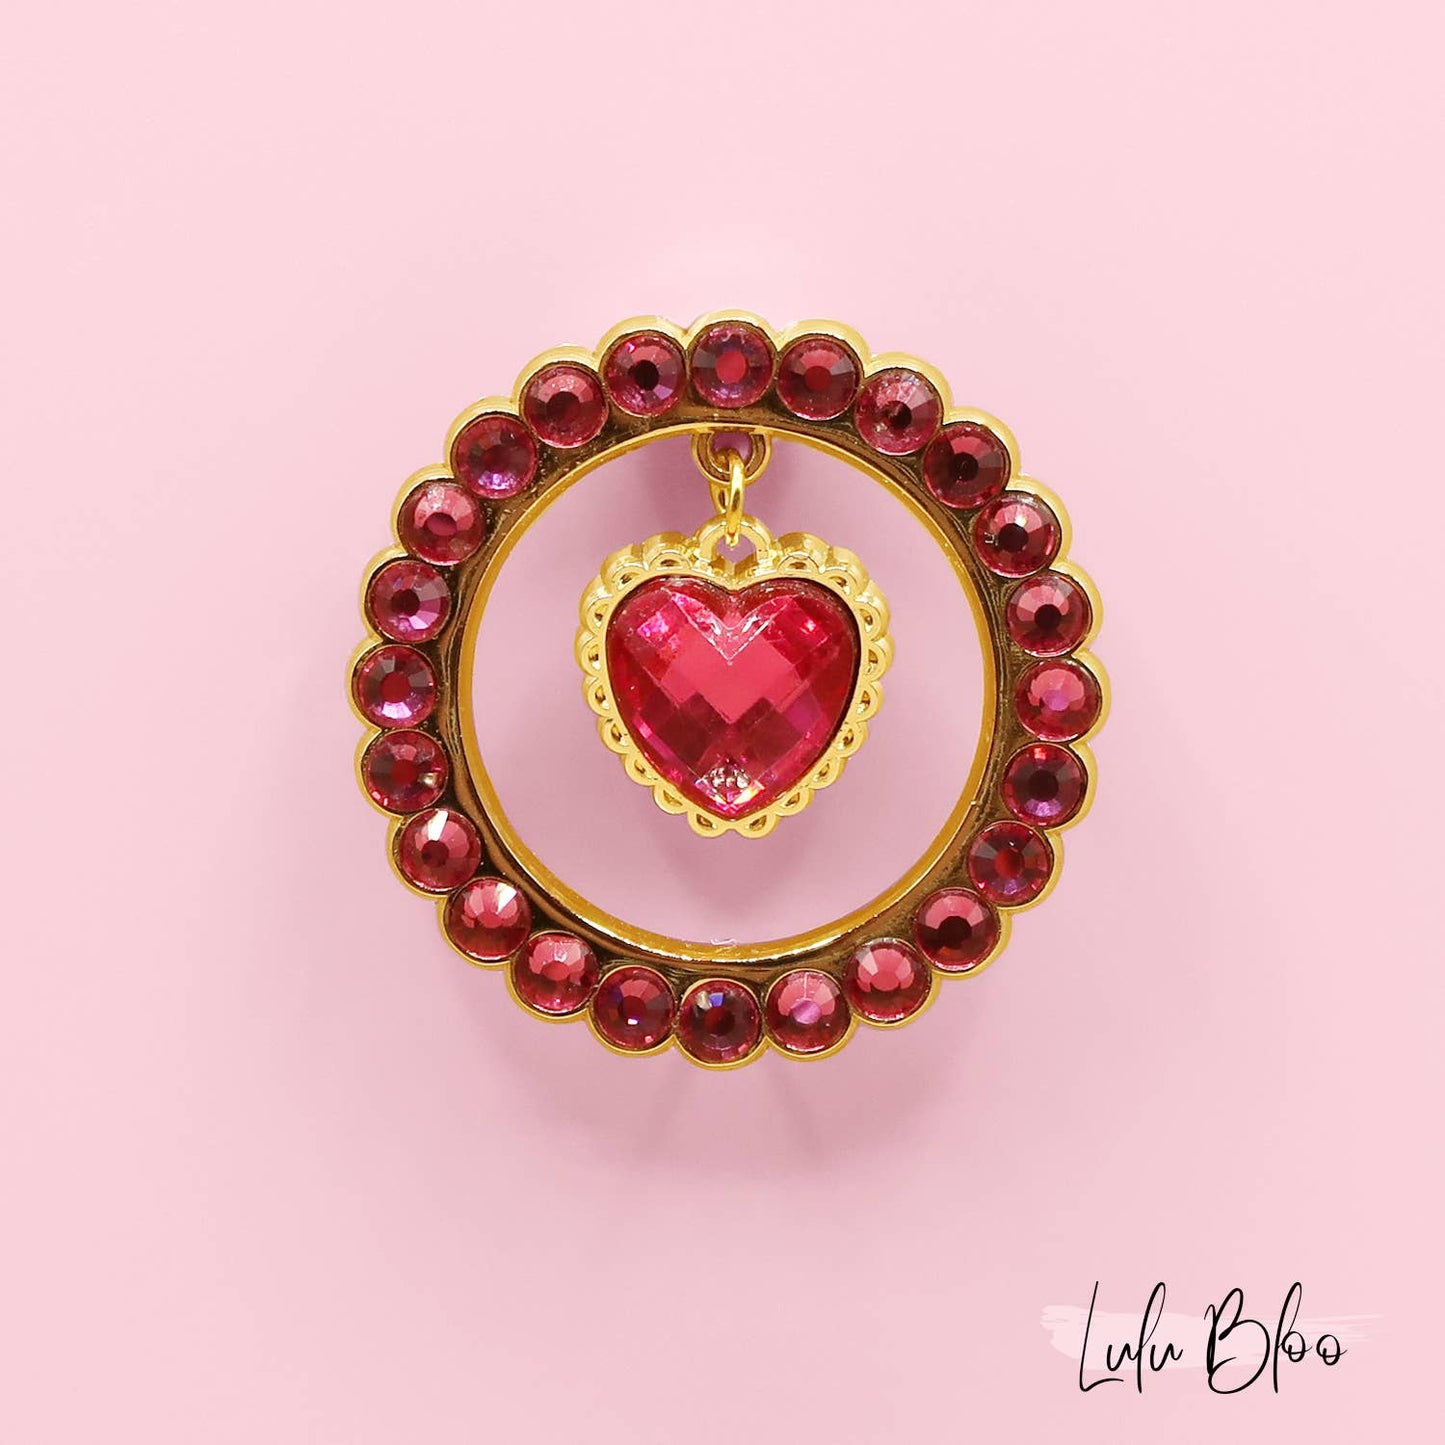 Lovely Heart 3-D Jeweled Lapel Pin